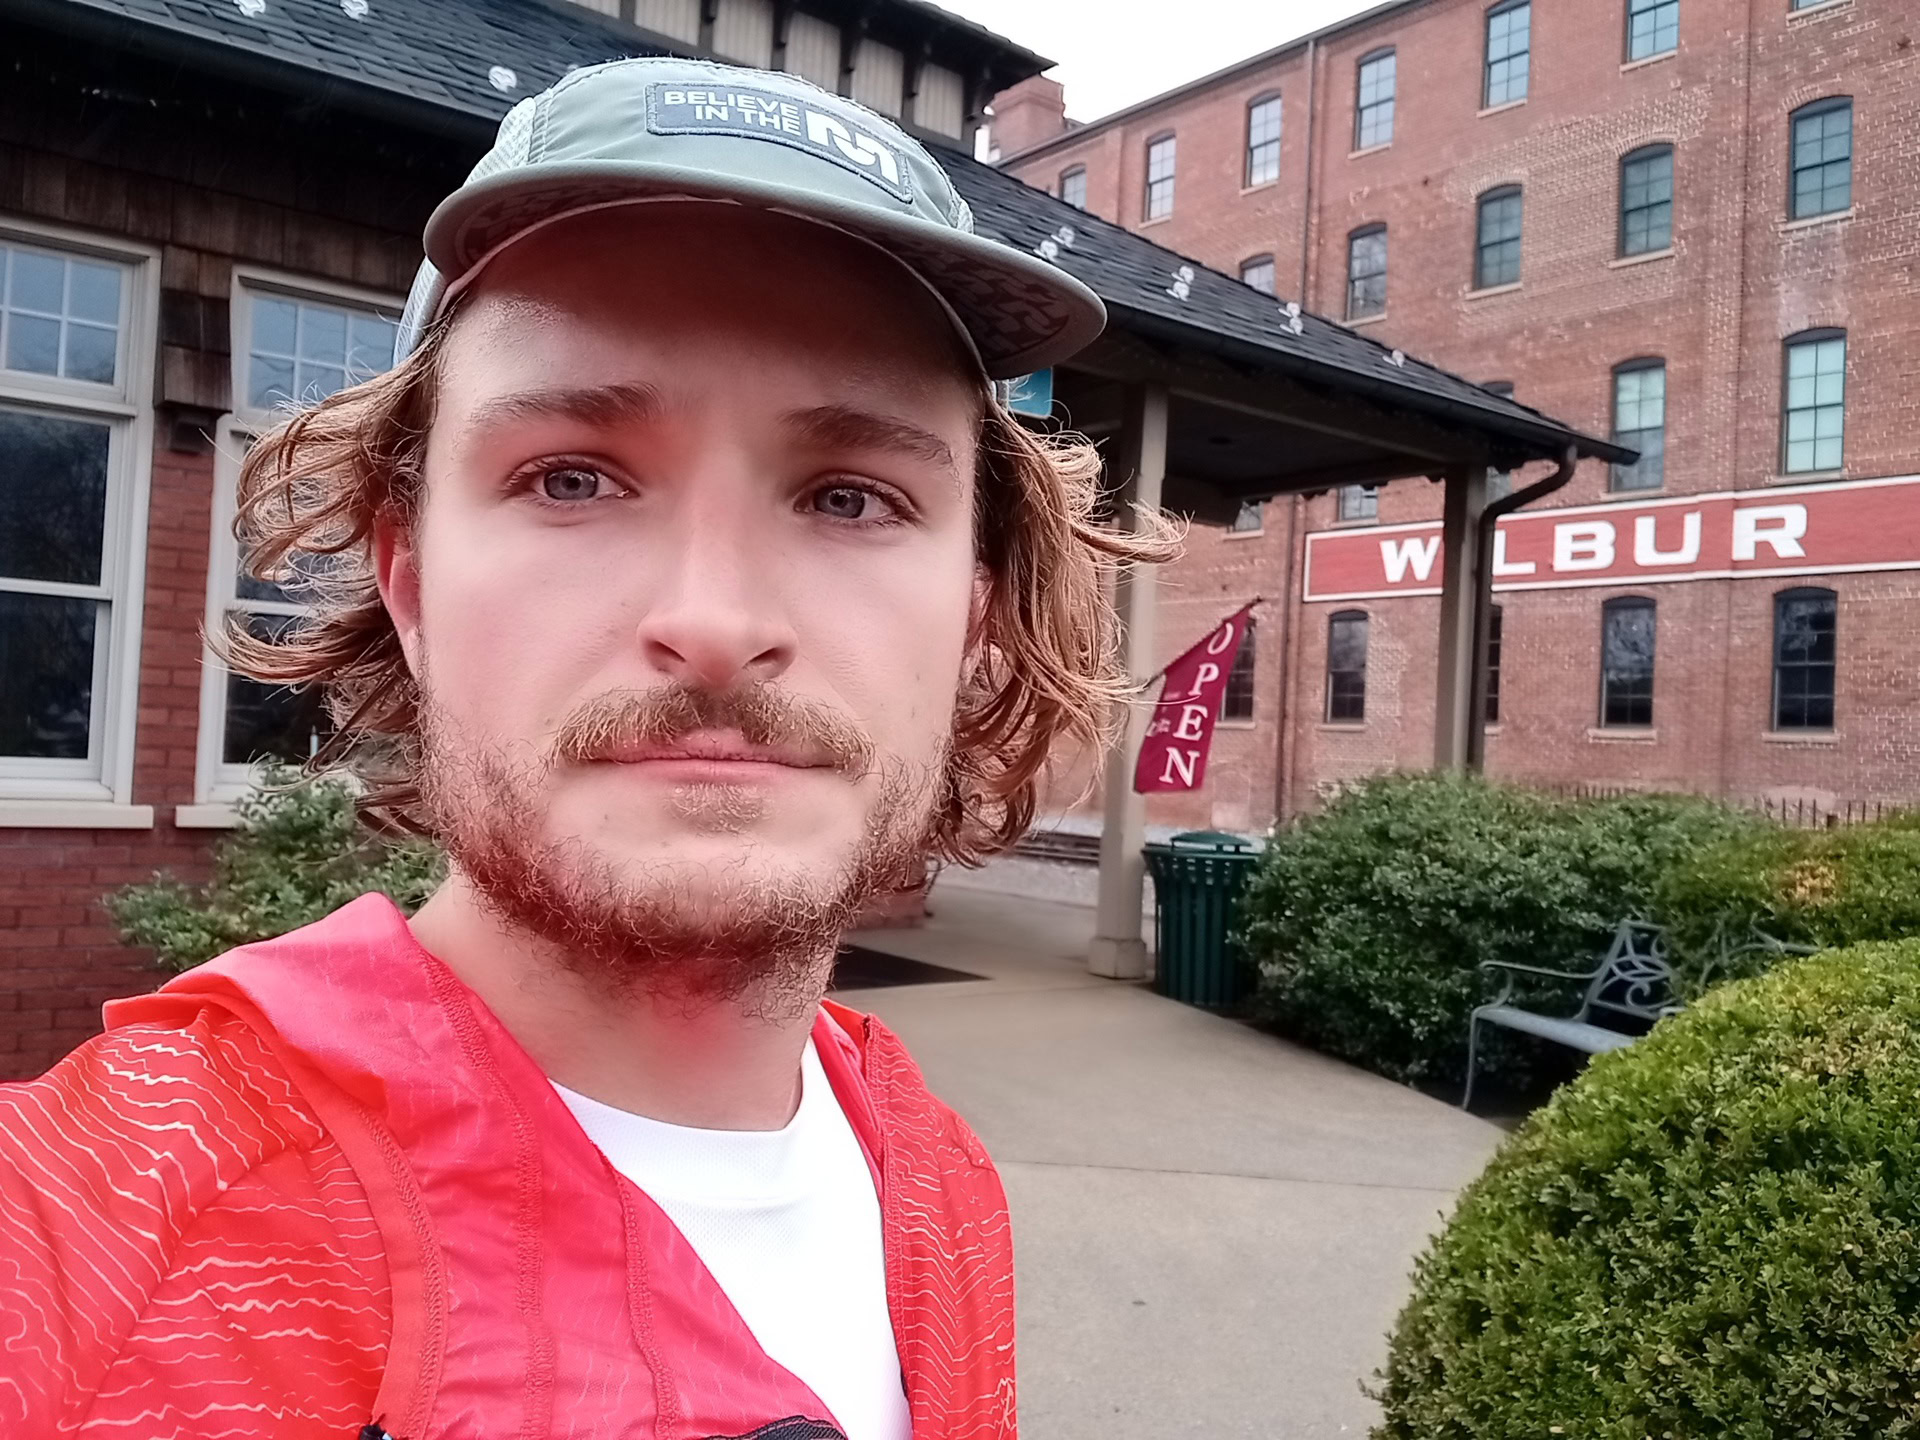 Moto G Stylus beauty filter selfie of a man with fair curly hair and facial hair wearing a white t-shirt and red top, with a baseball cap, outdoors in front of a red brick building.